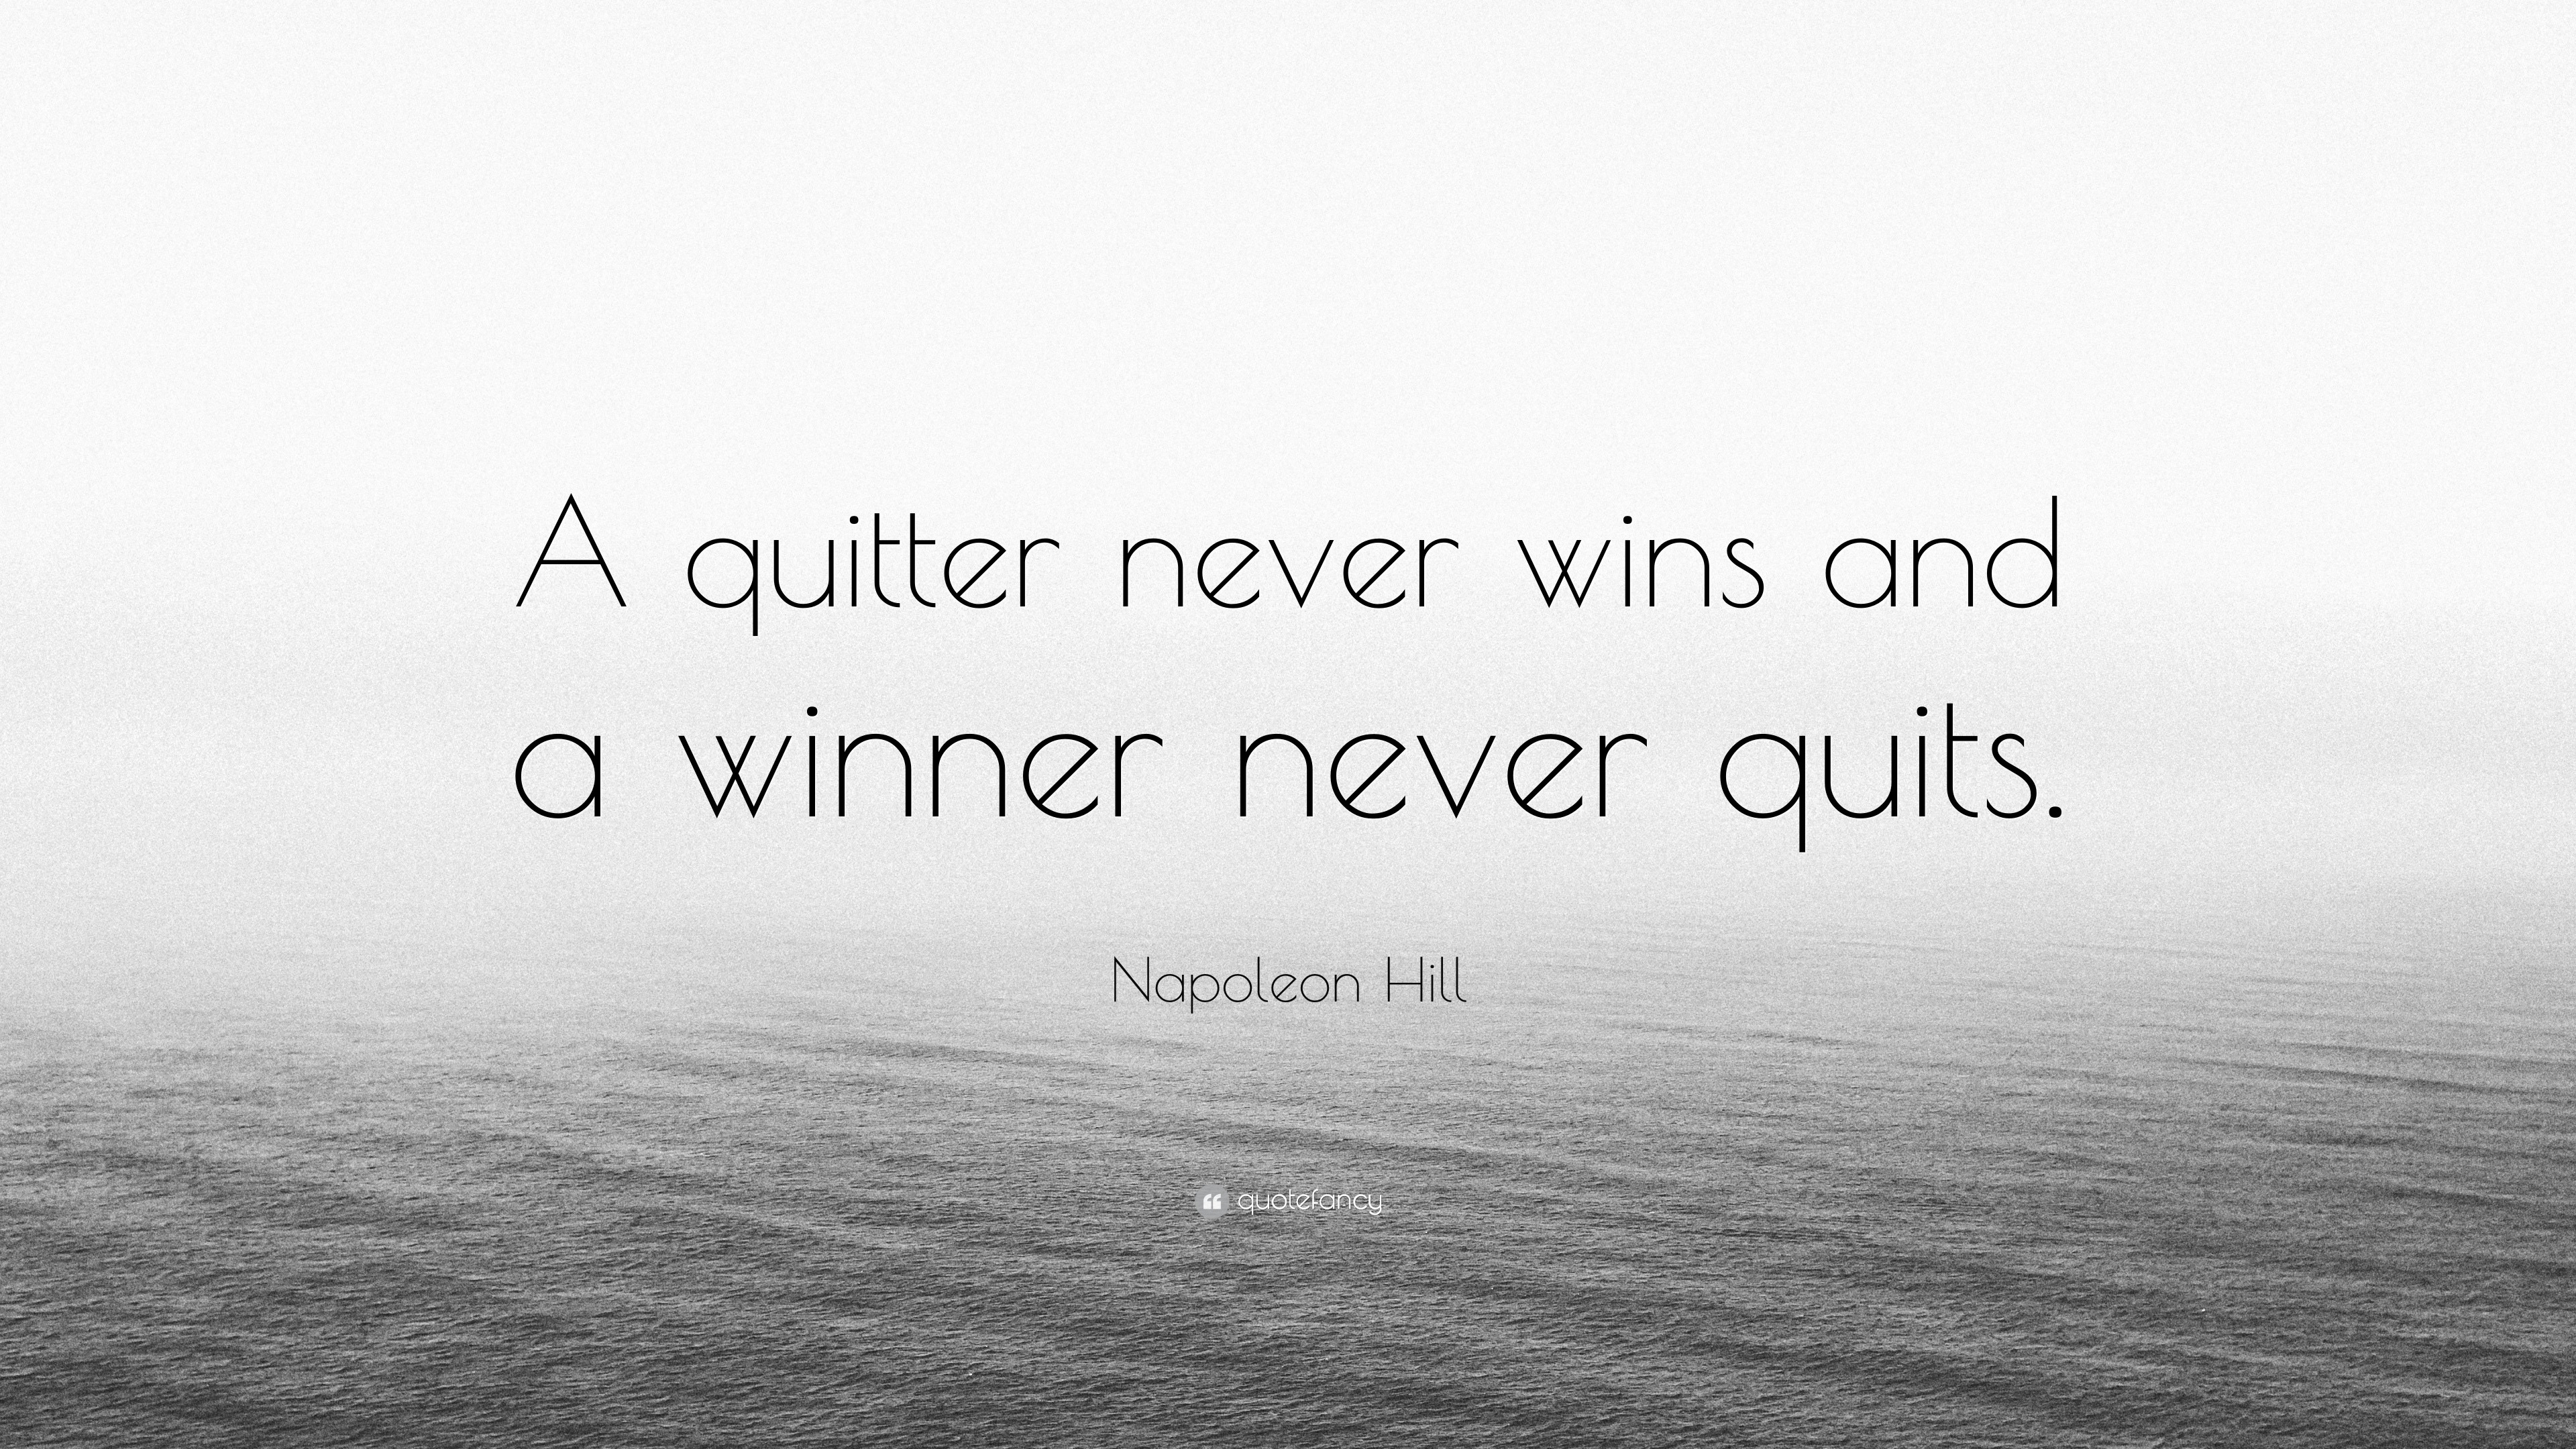 who wrote a quitter never wins